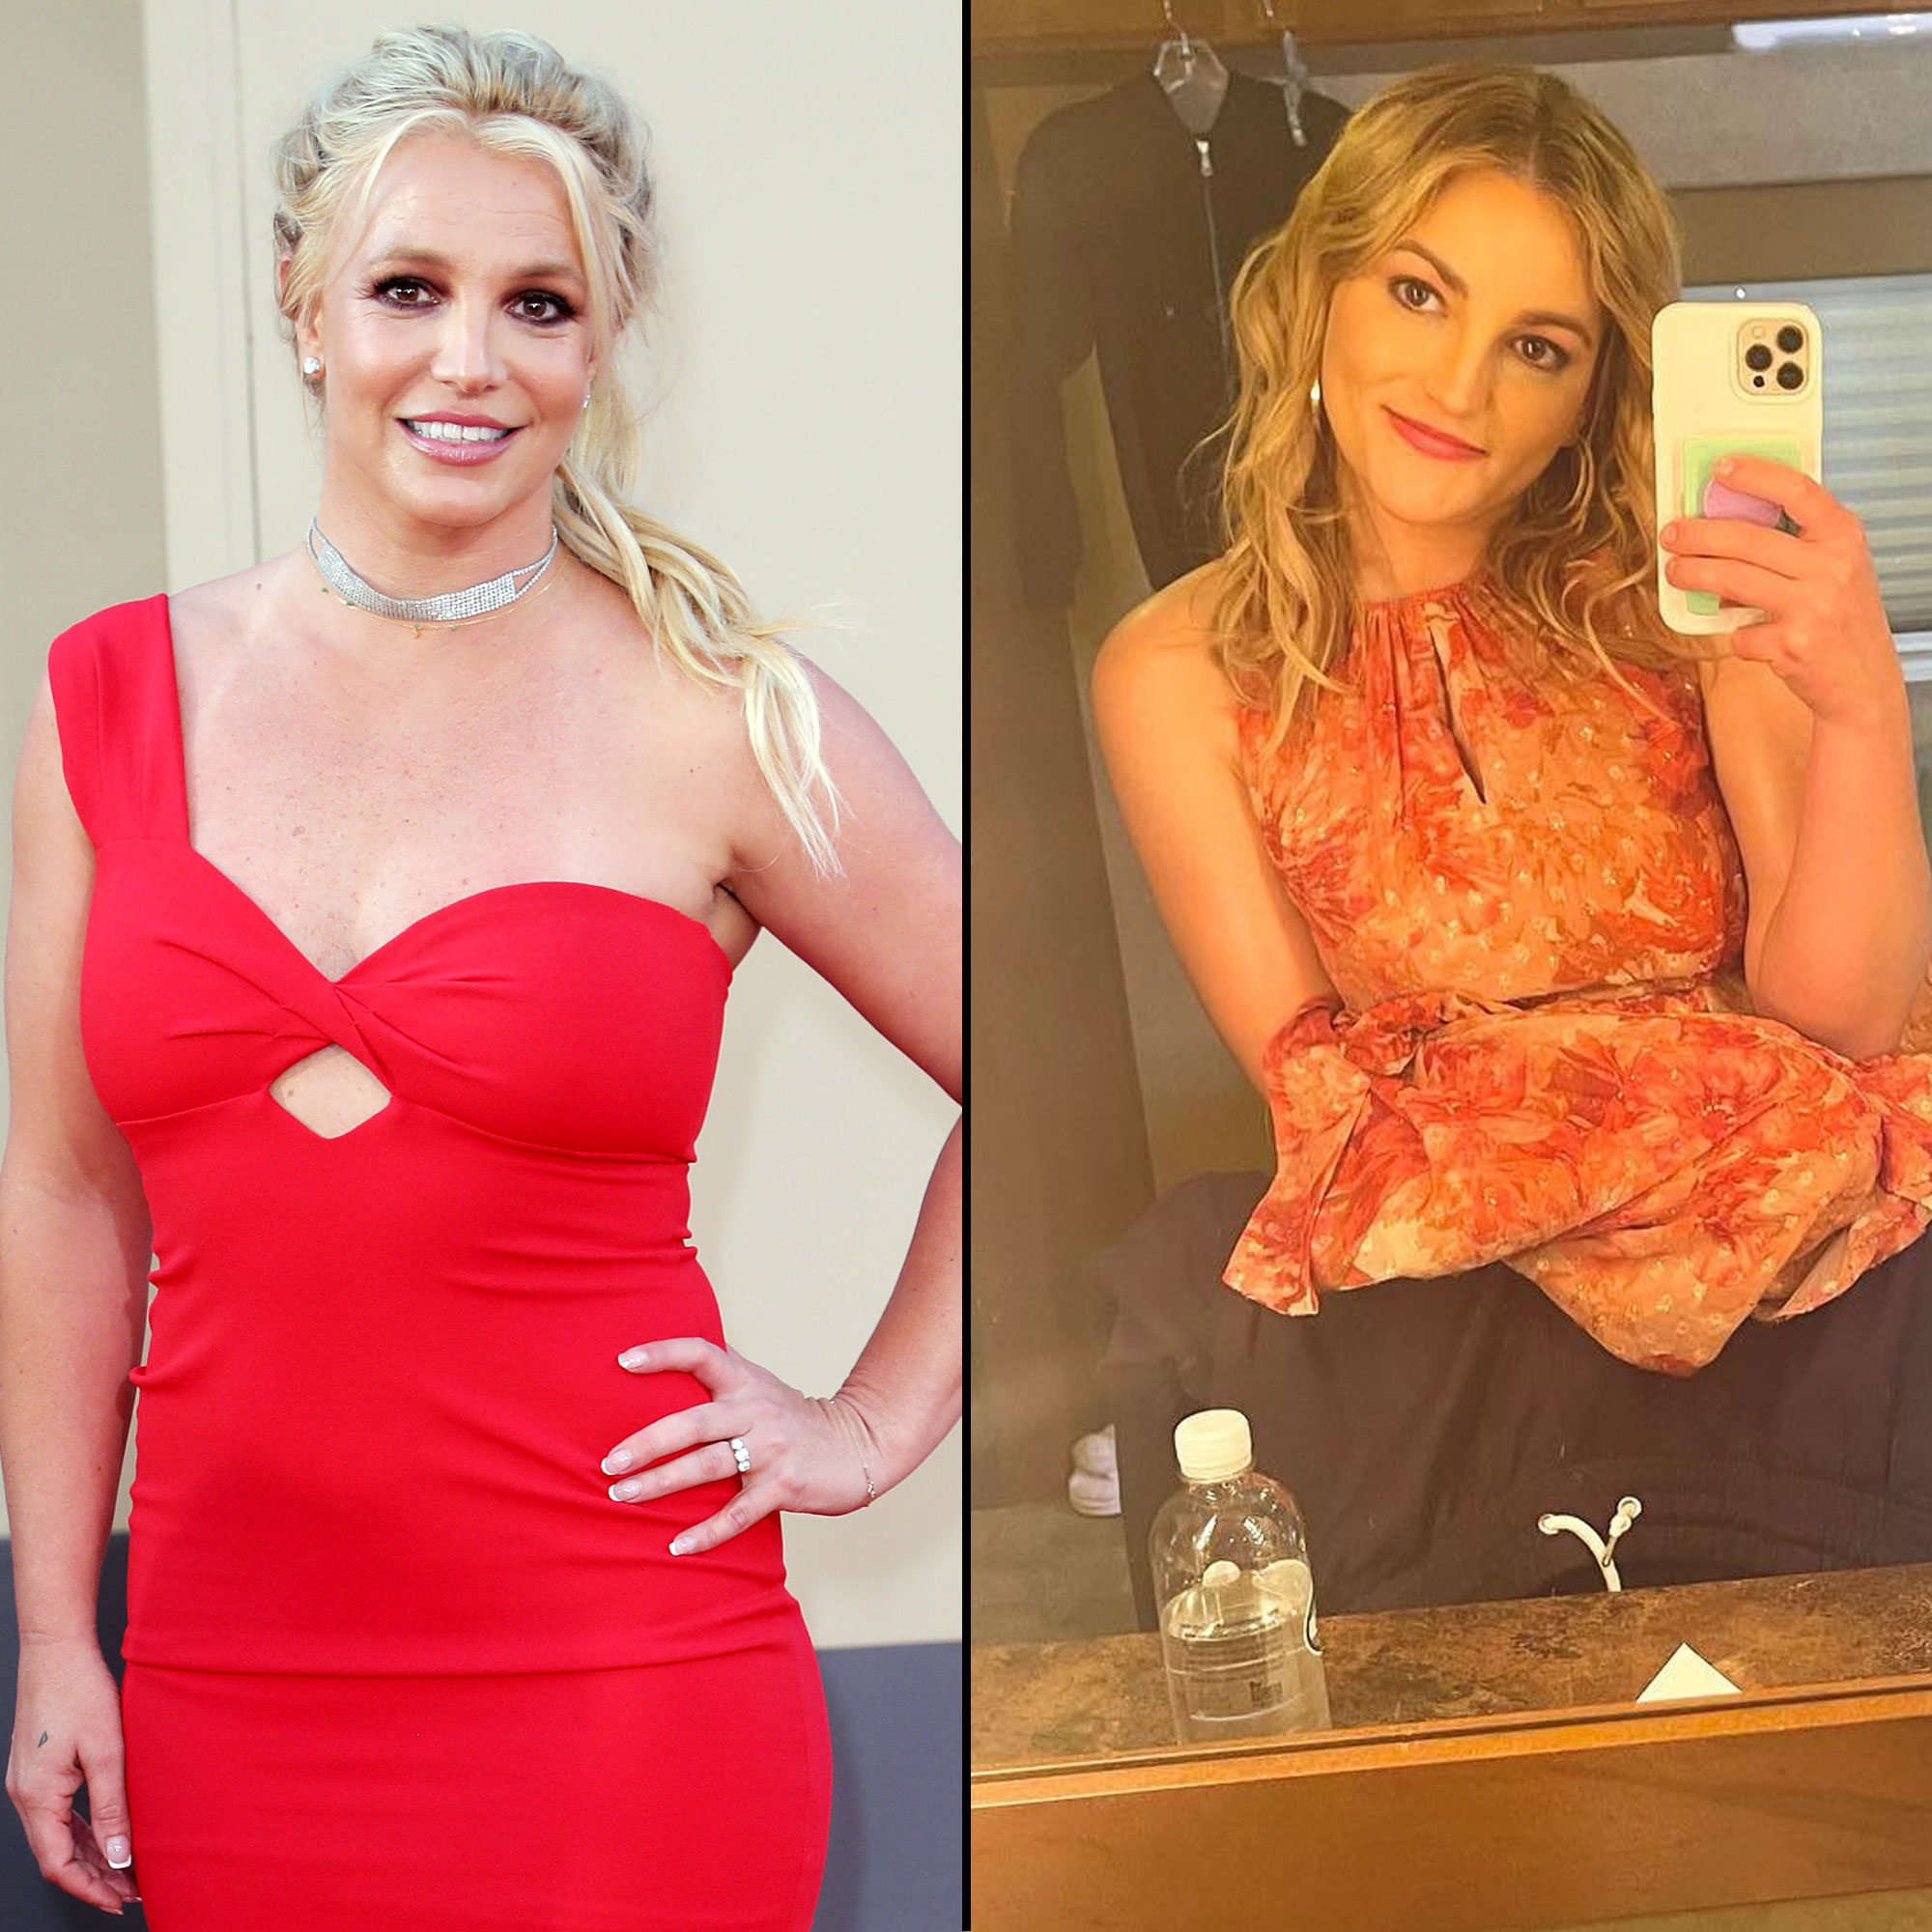 Squirting Britney Spears Pussy - Britney Spears, Jamie Lynn Spears' Ups and Downs: A Timeline of Drama